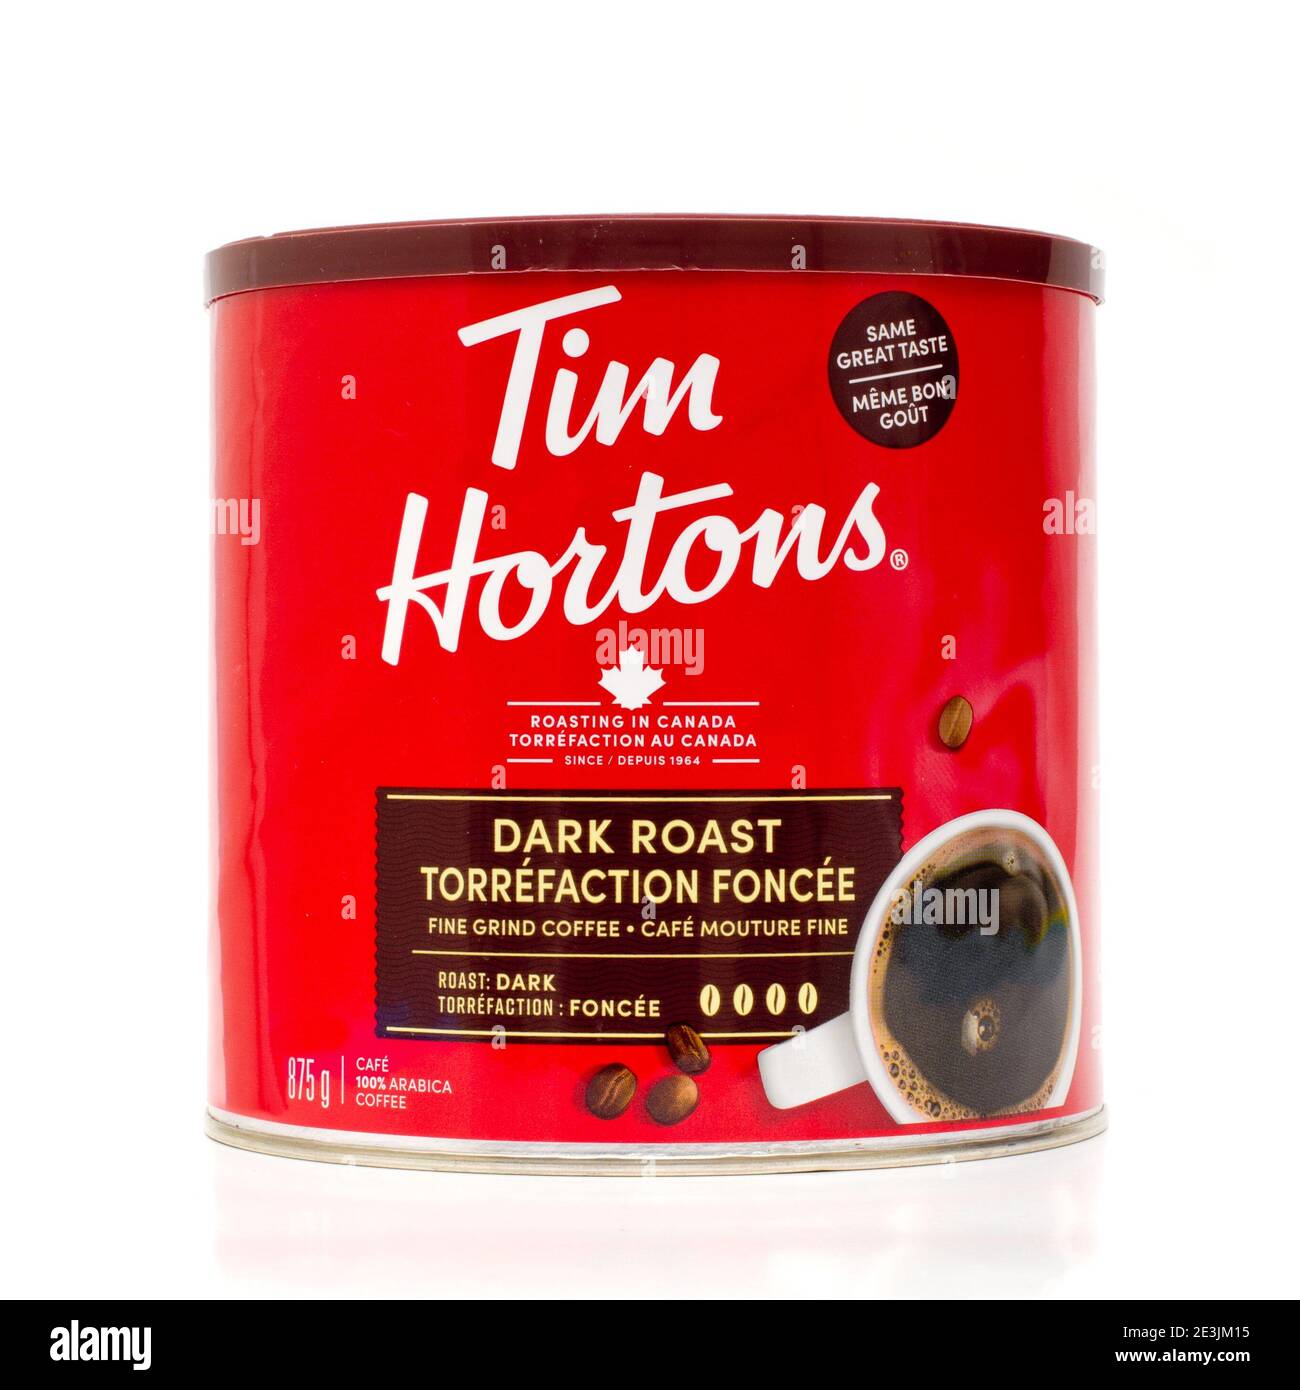 Pleasant Valley, Canada - January 19 2021: Tim Hortons coffee can. Tim Hortons is a Canadian fast service restaurant well known for its coffee and don Stock Photo